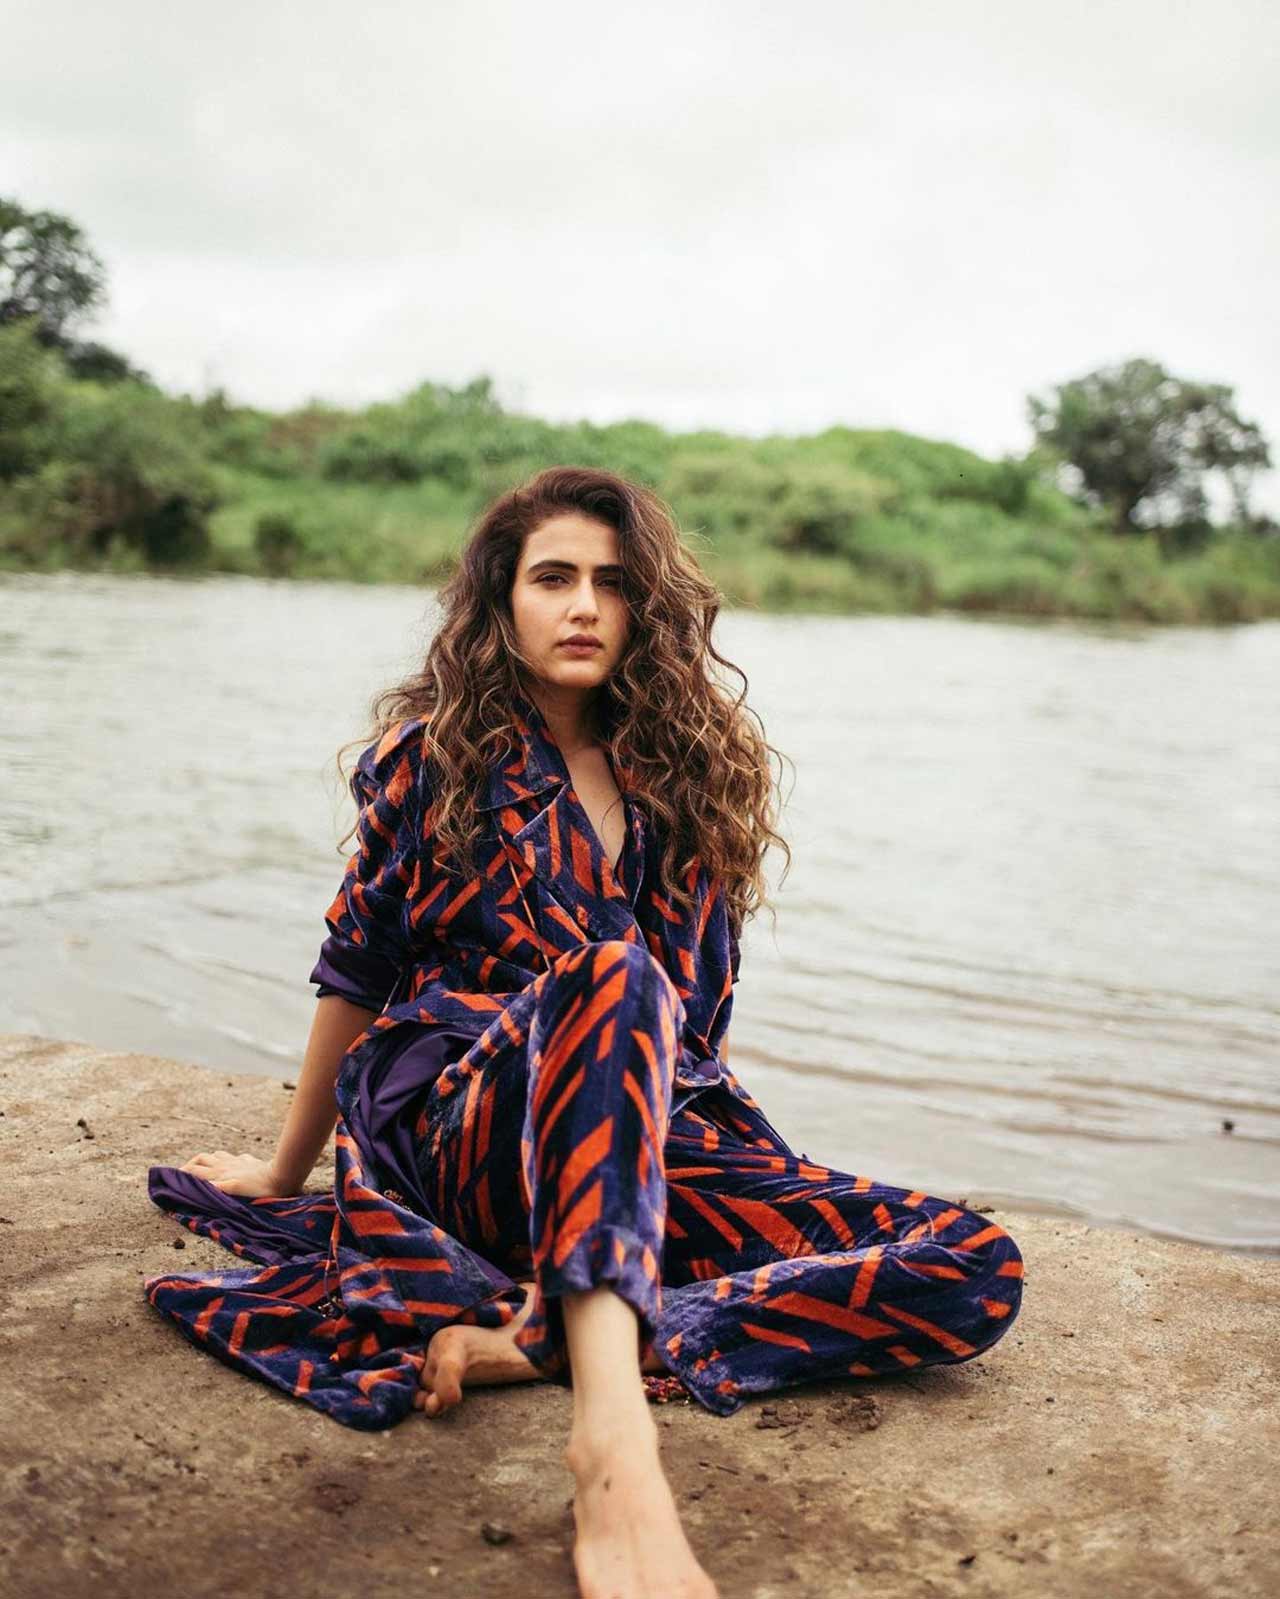 Fatima Sana Shaikh is a queen of wearing artistic prints in her unique style that looks incredibly amazing and is an inspiration for many. You can steal these fashion cues from Fatima's wardrobe and glam up your looks. Almost everyone wants to own a comfortable look that looks stylish and unique. If you are looking for a sure shot winner this season, you should take style from Fatima.